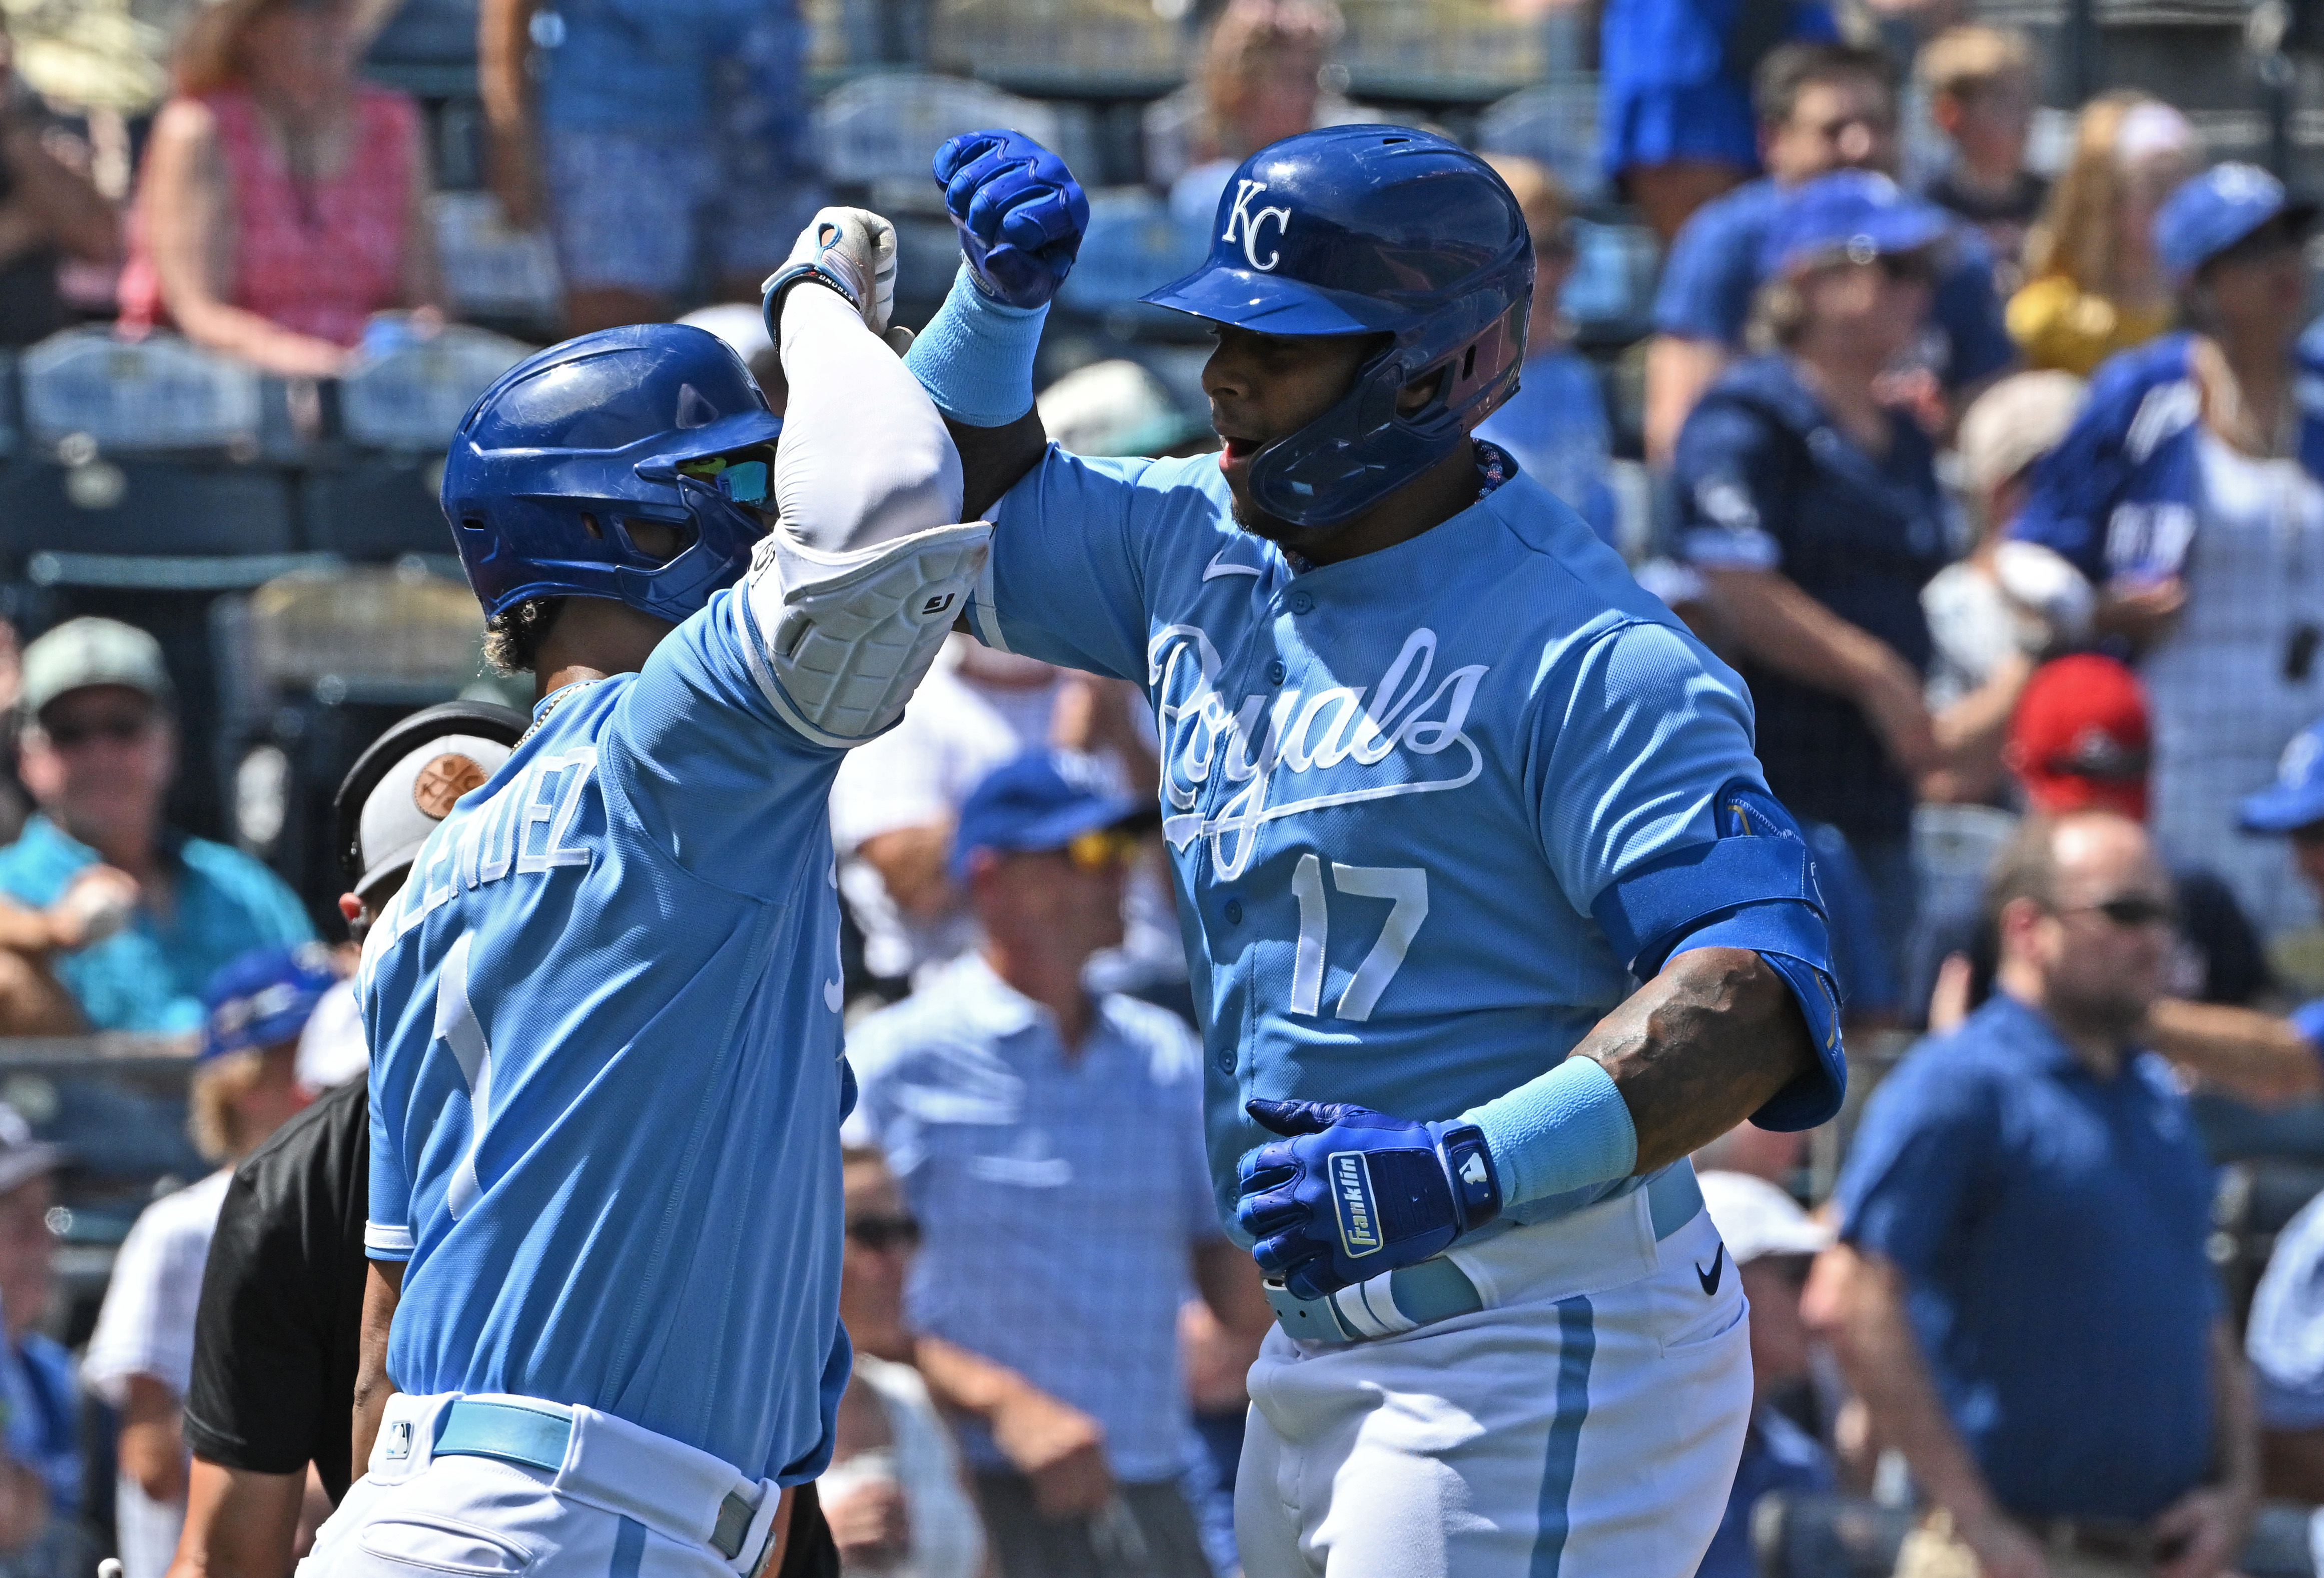 Rodriguez has 5 hits, 5 RBIs and go-ahead 3-run shot in the eighth as  Mariners beat Royals 6-4